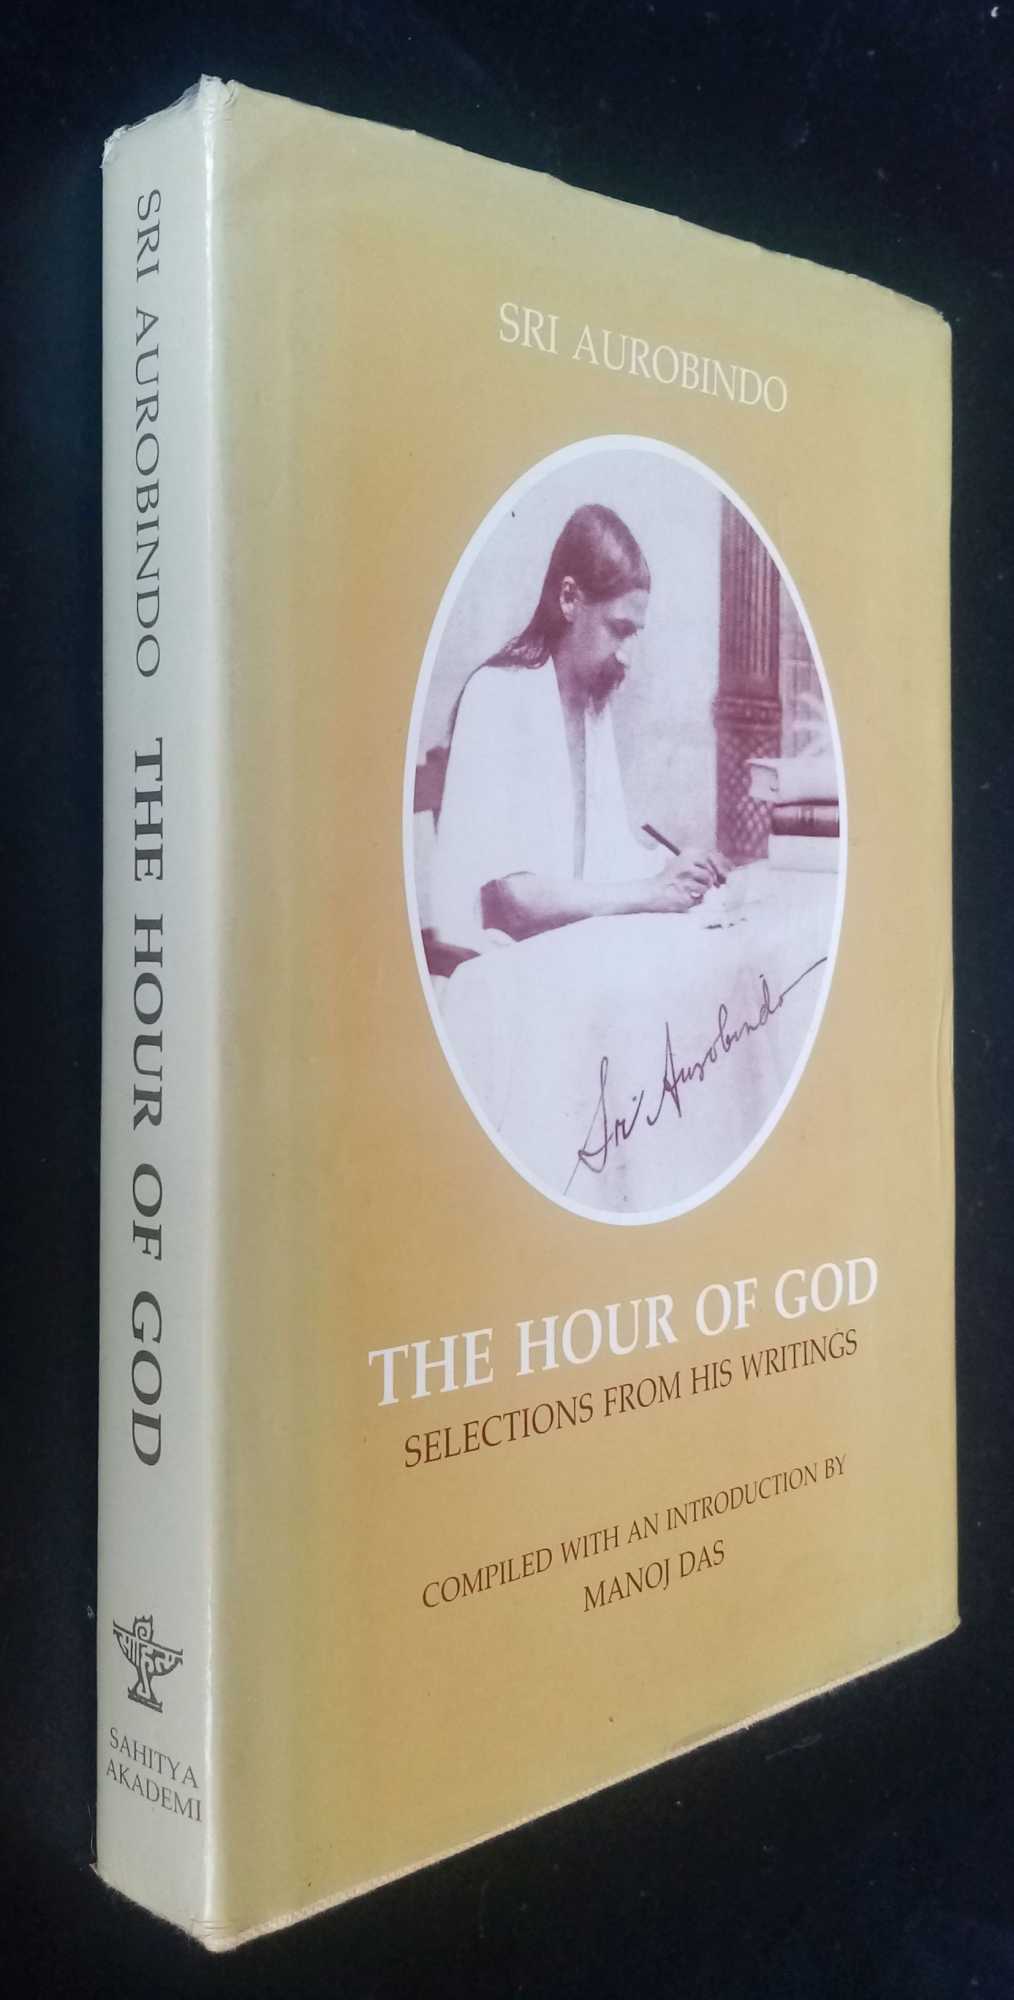 Sri Aurobindo - The Hour of God: Selections from His Writings